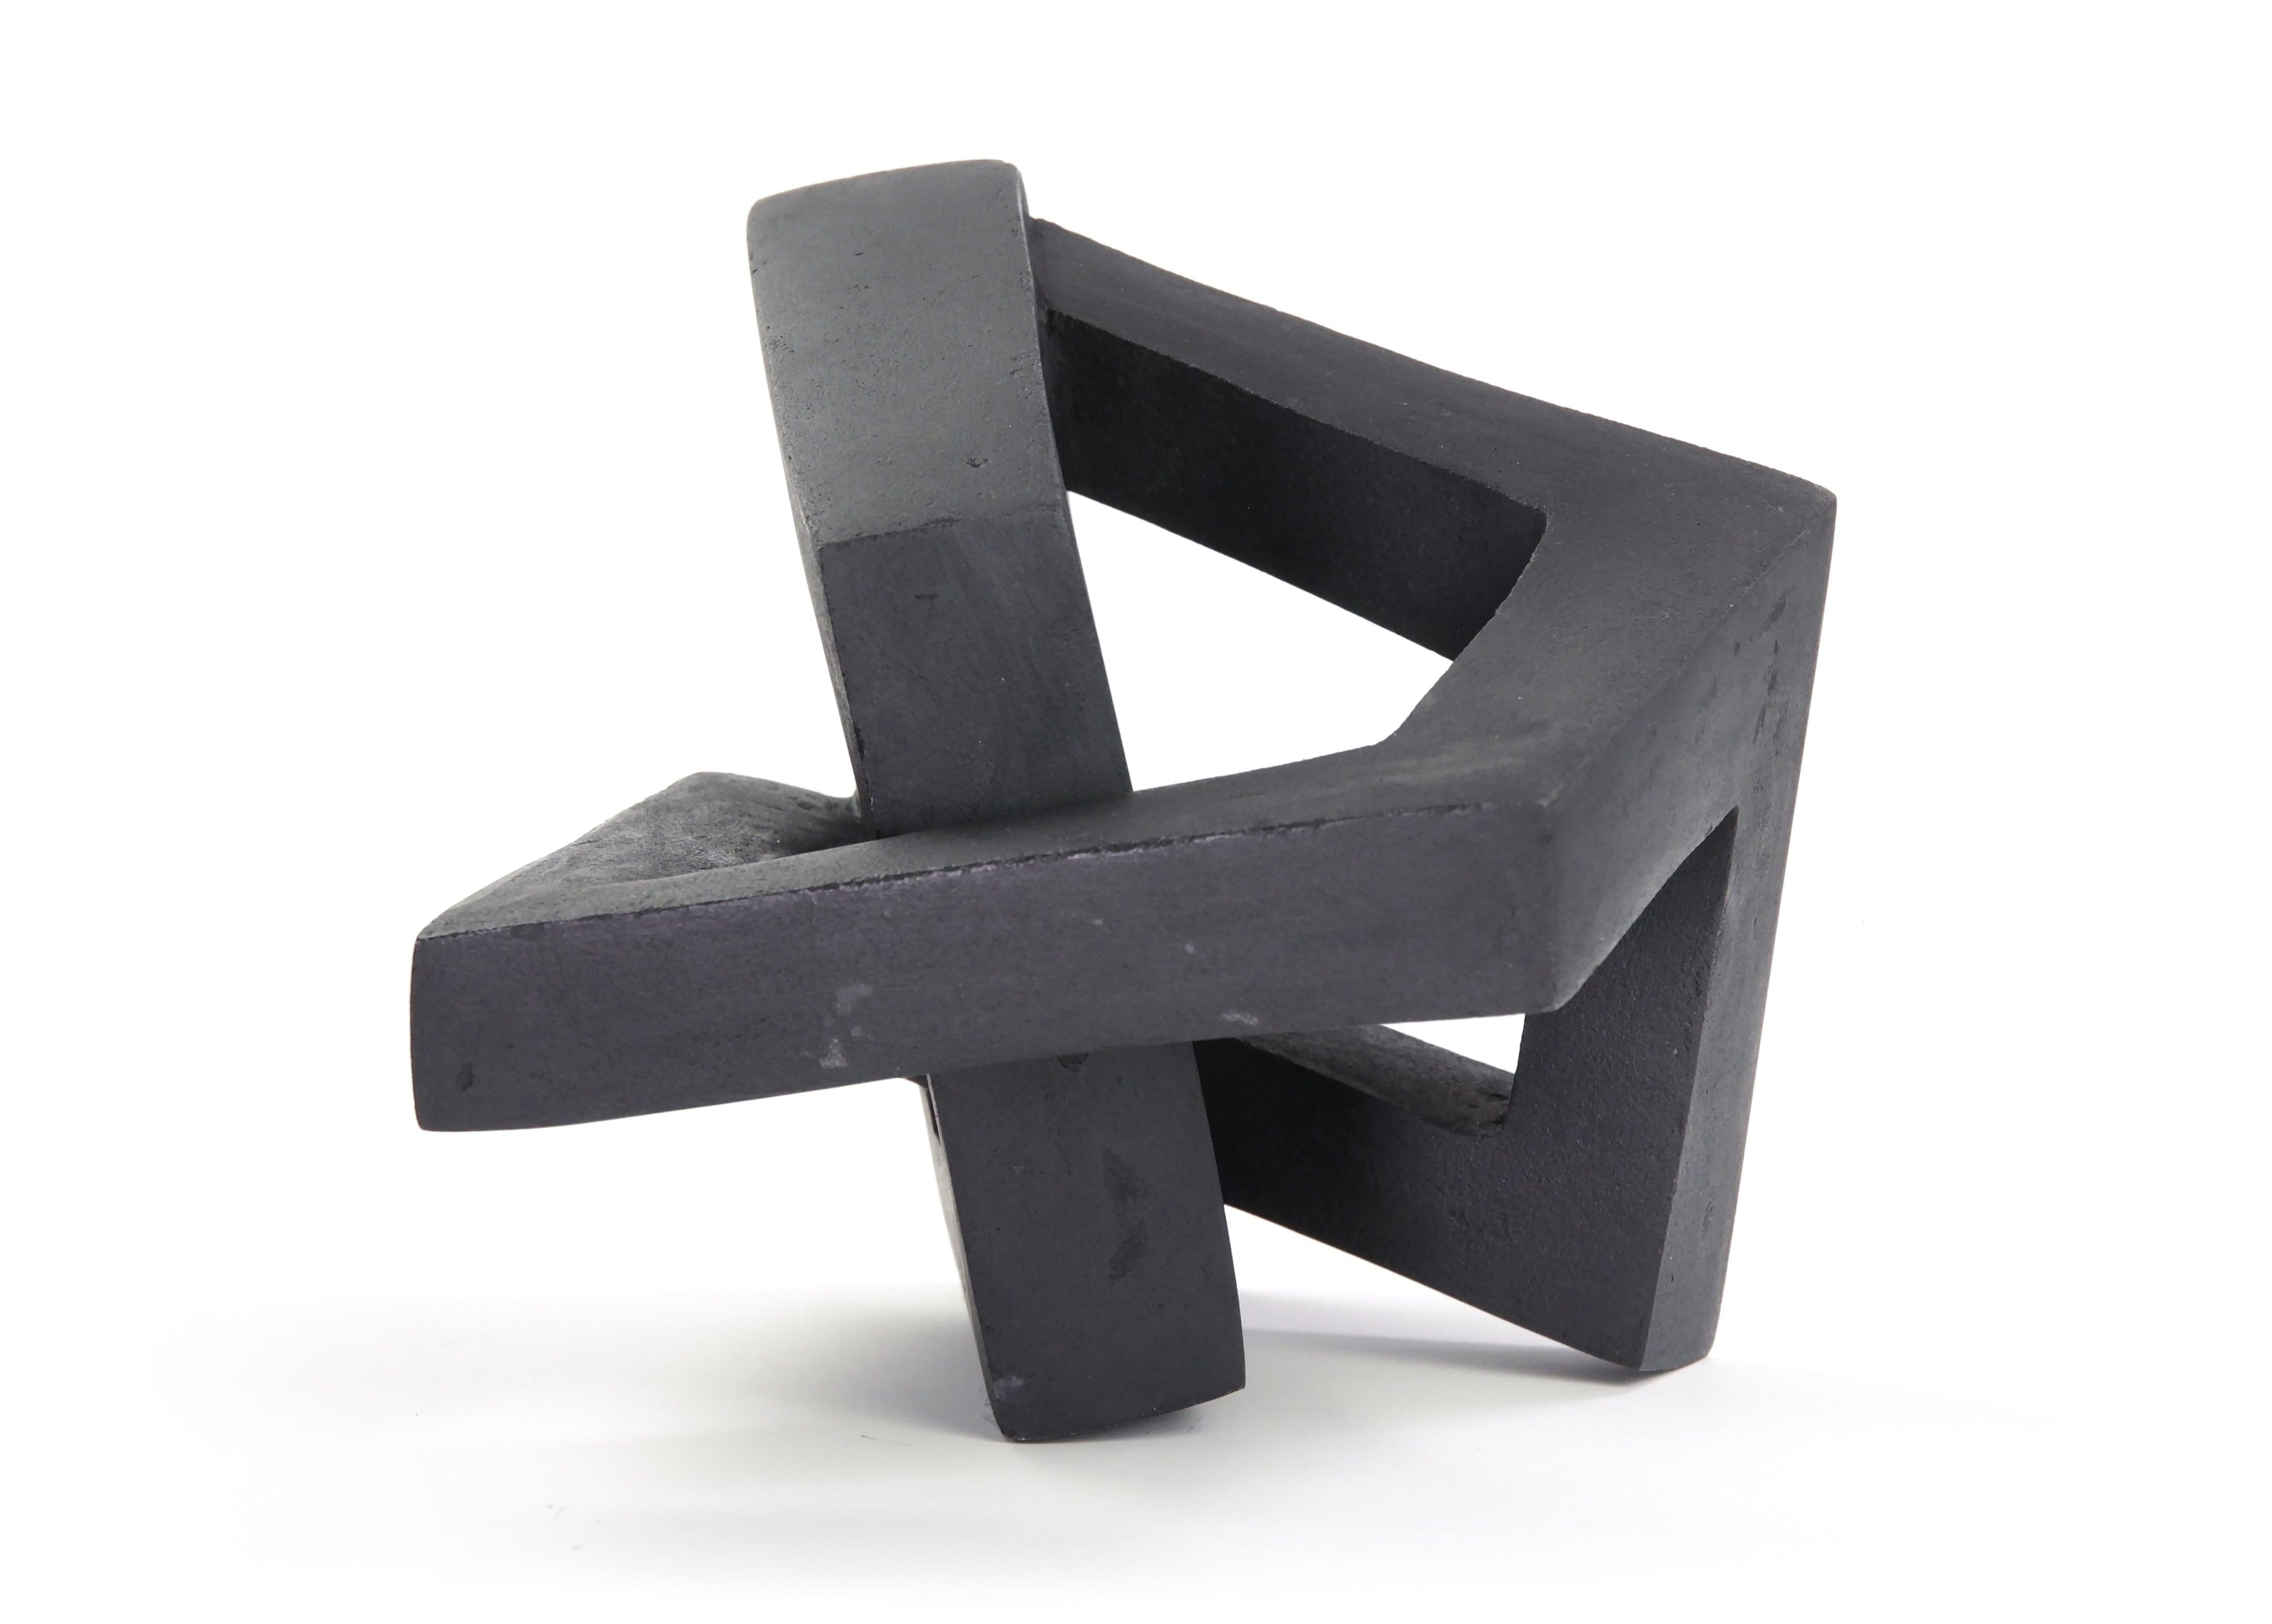 Variation III by French contemporary artist Delphine Brabant, from the Variation series. 
Concrete sculpture colored in the mass, 24 cm × 21 cm × 20 cm. Limited edition of 8 + 4 A.P.
In this series the artist produces a succession of variations